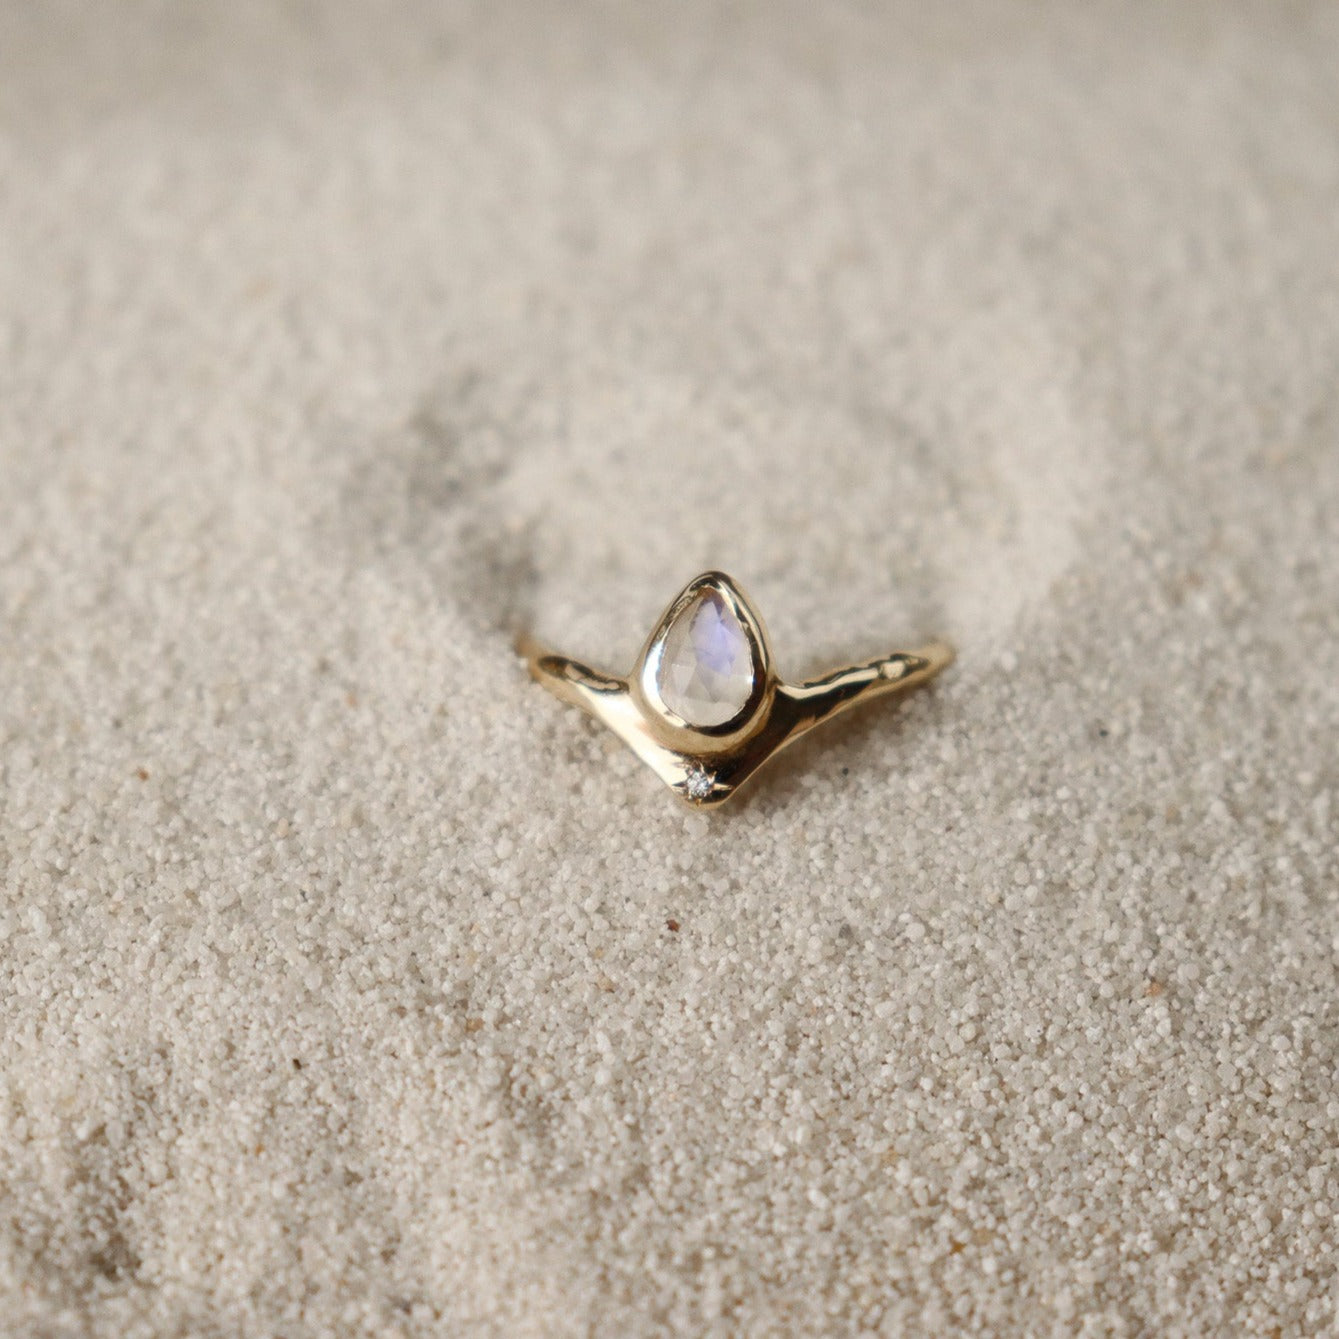 Pear-shaped moonstone, bezel-set with a dazzling diamond star positioned at the base for a celestial-inspired and enchanting jewelry design.